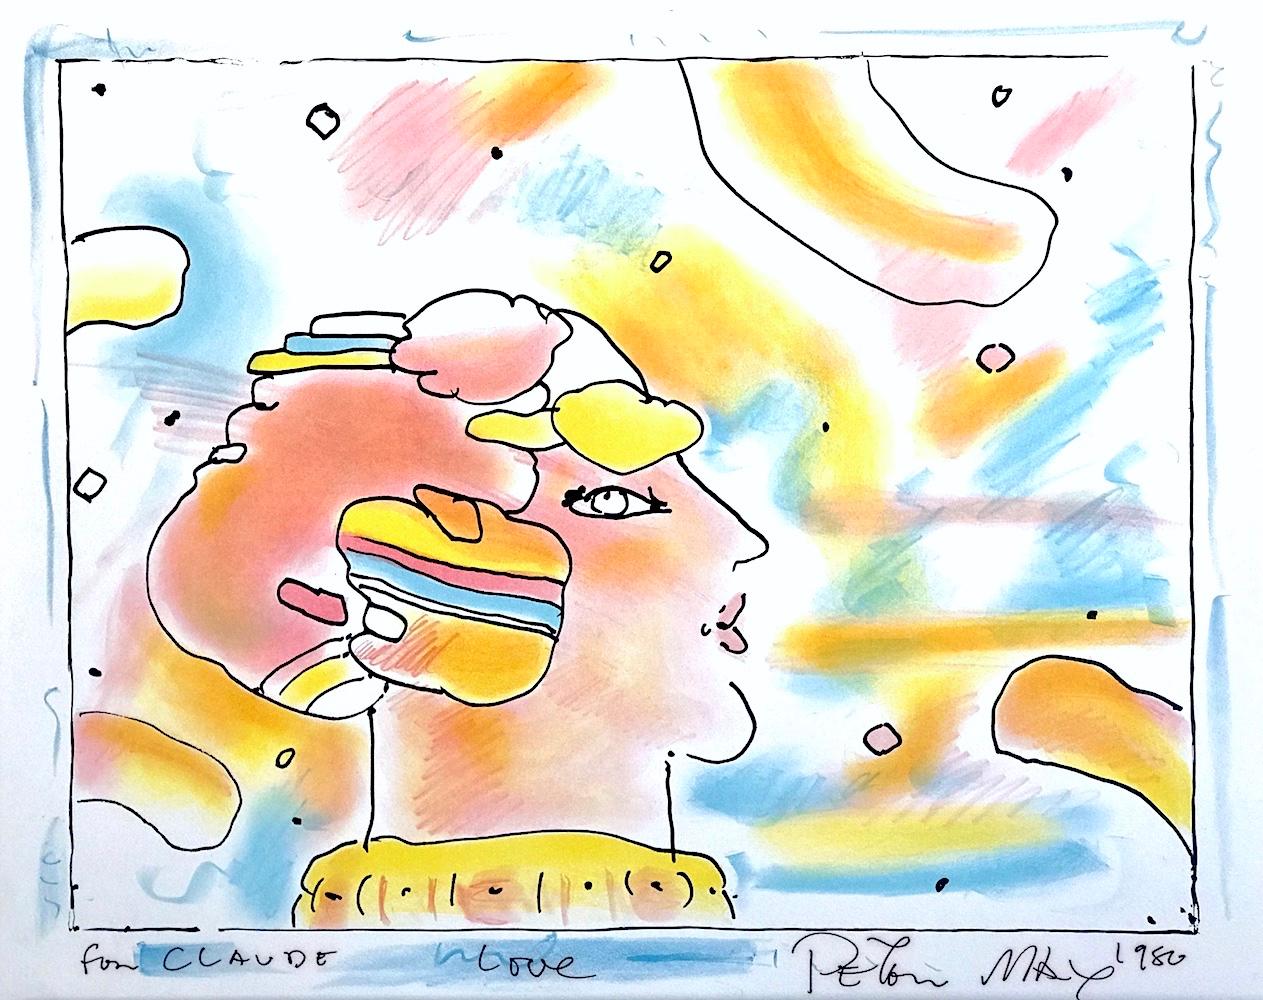 FROM ANOTHER PLANET Signed Lithograph, Profile Portrait, Cosmic Head Meditation  - Print by Peter Max